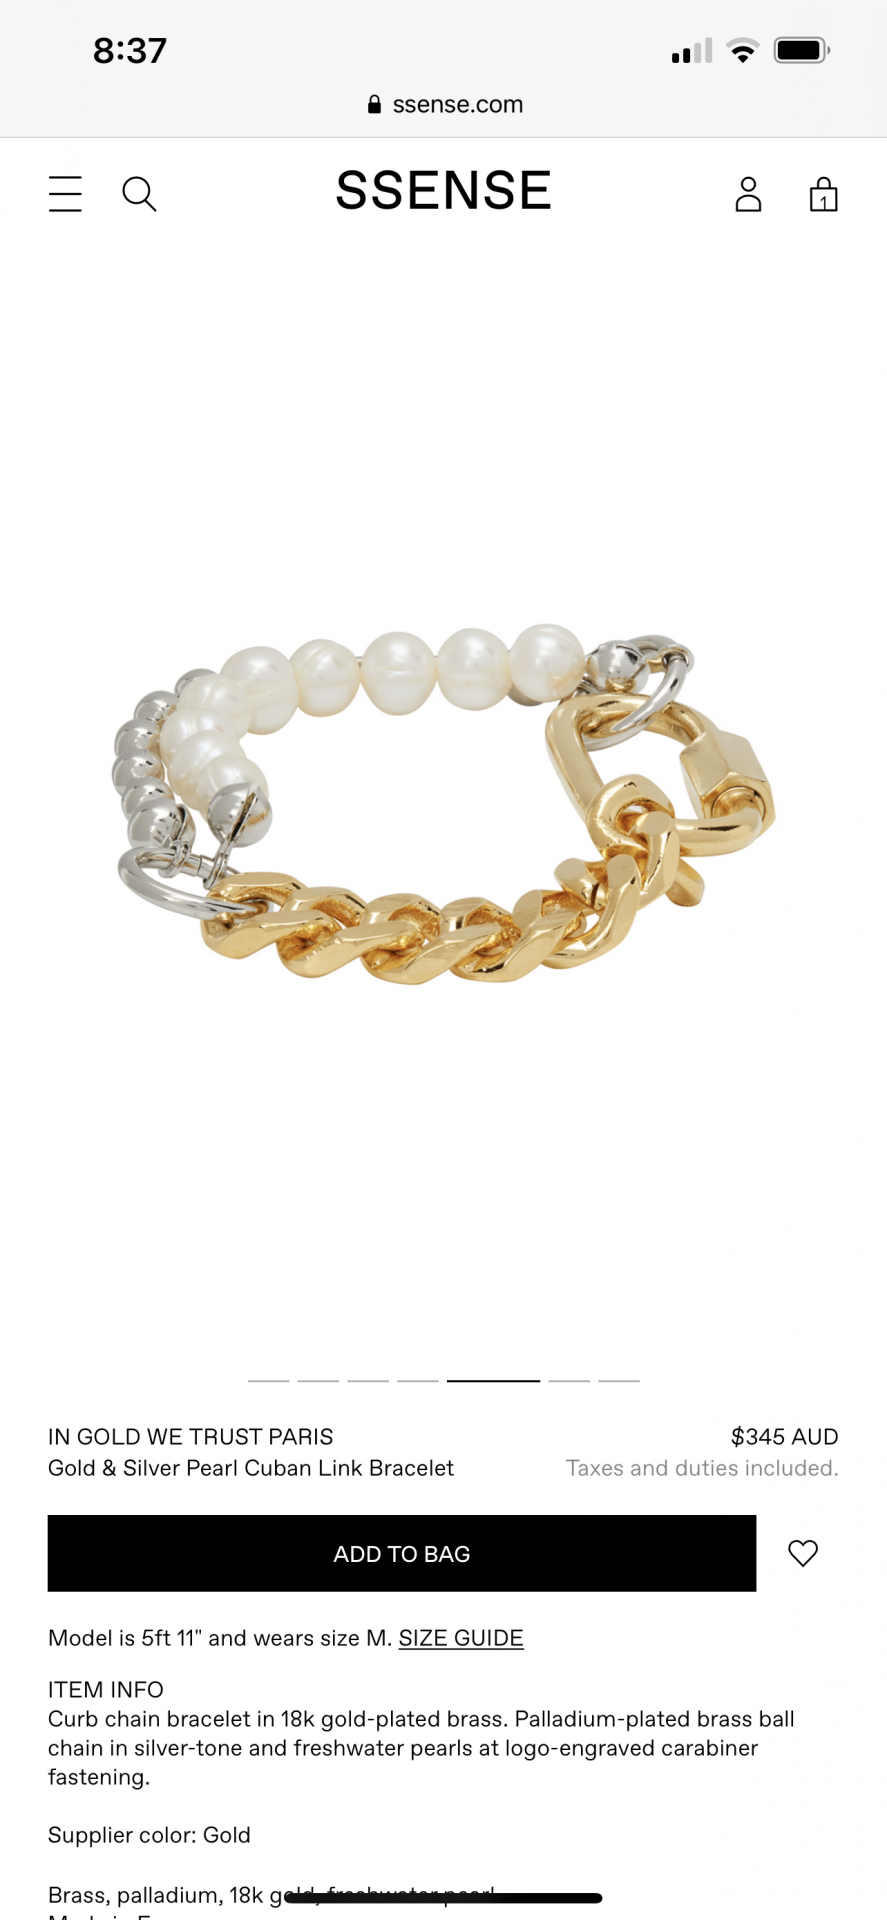 Gold and silver pearl Cuban link bracelet